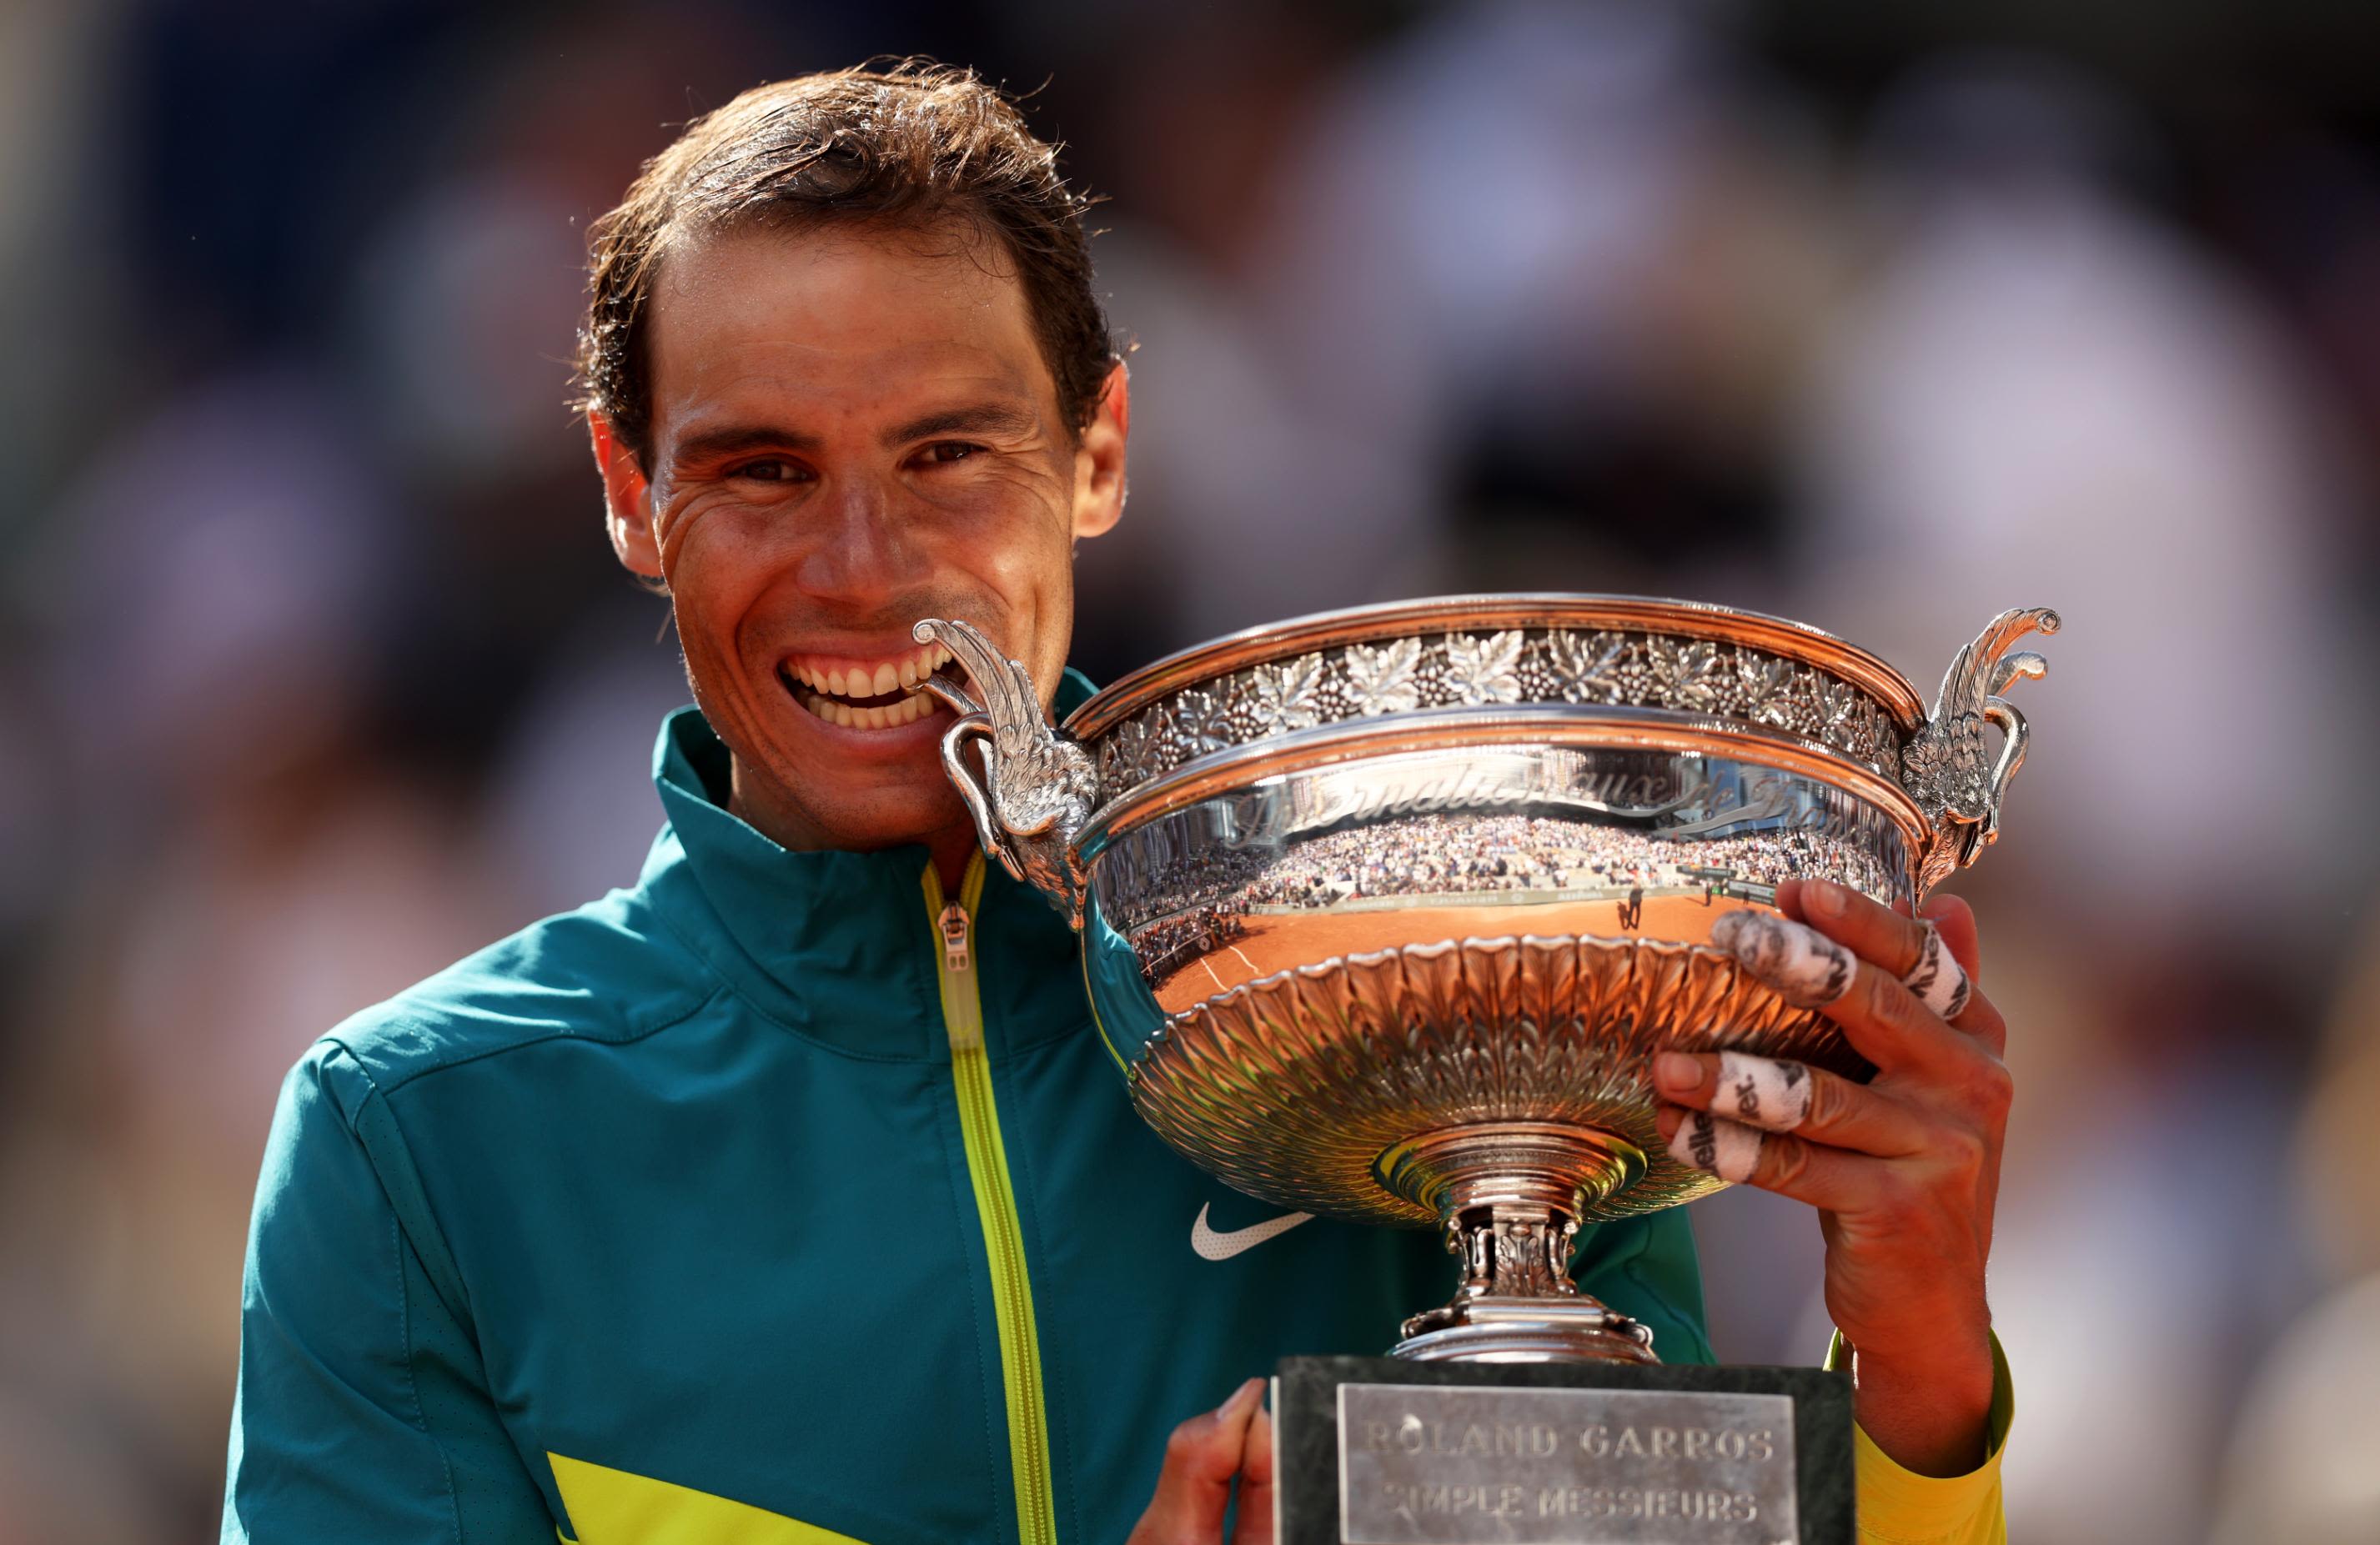 19-facts-about-rafael-nadal